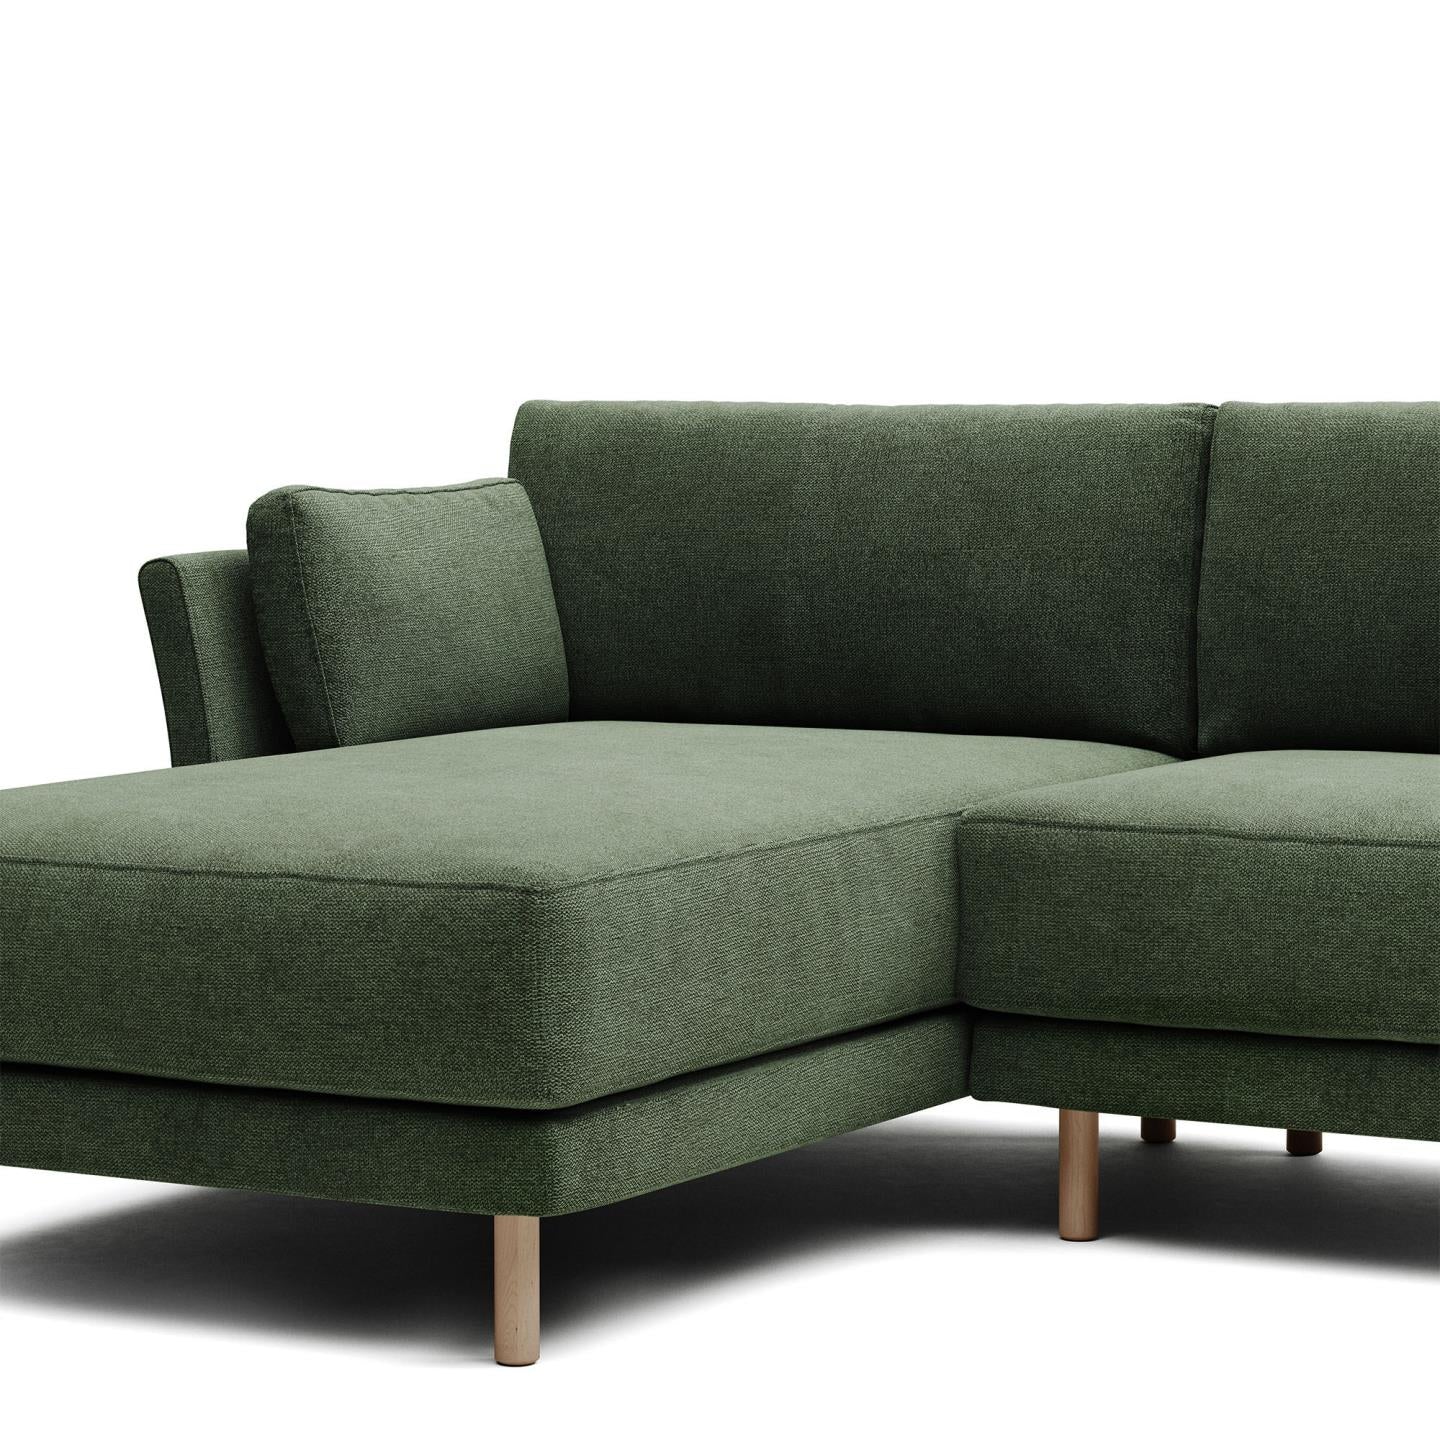 Sofia 3 Seater Sofa with Left/Right Side Chaise - Green